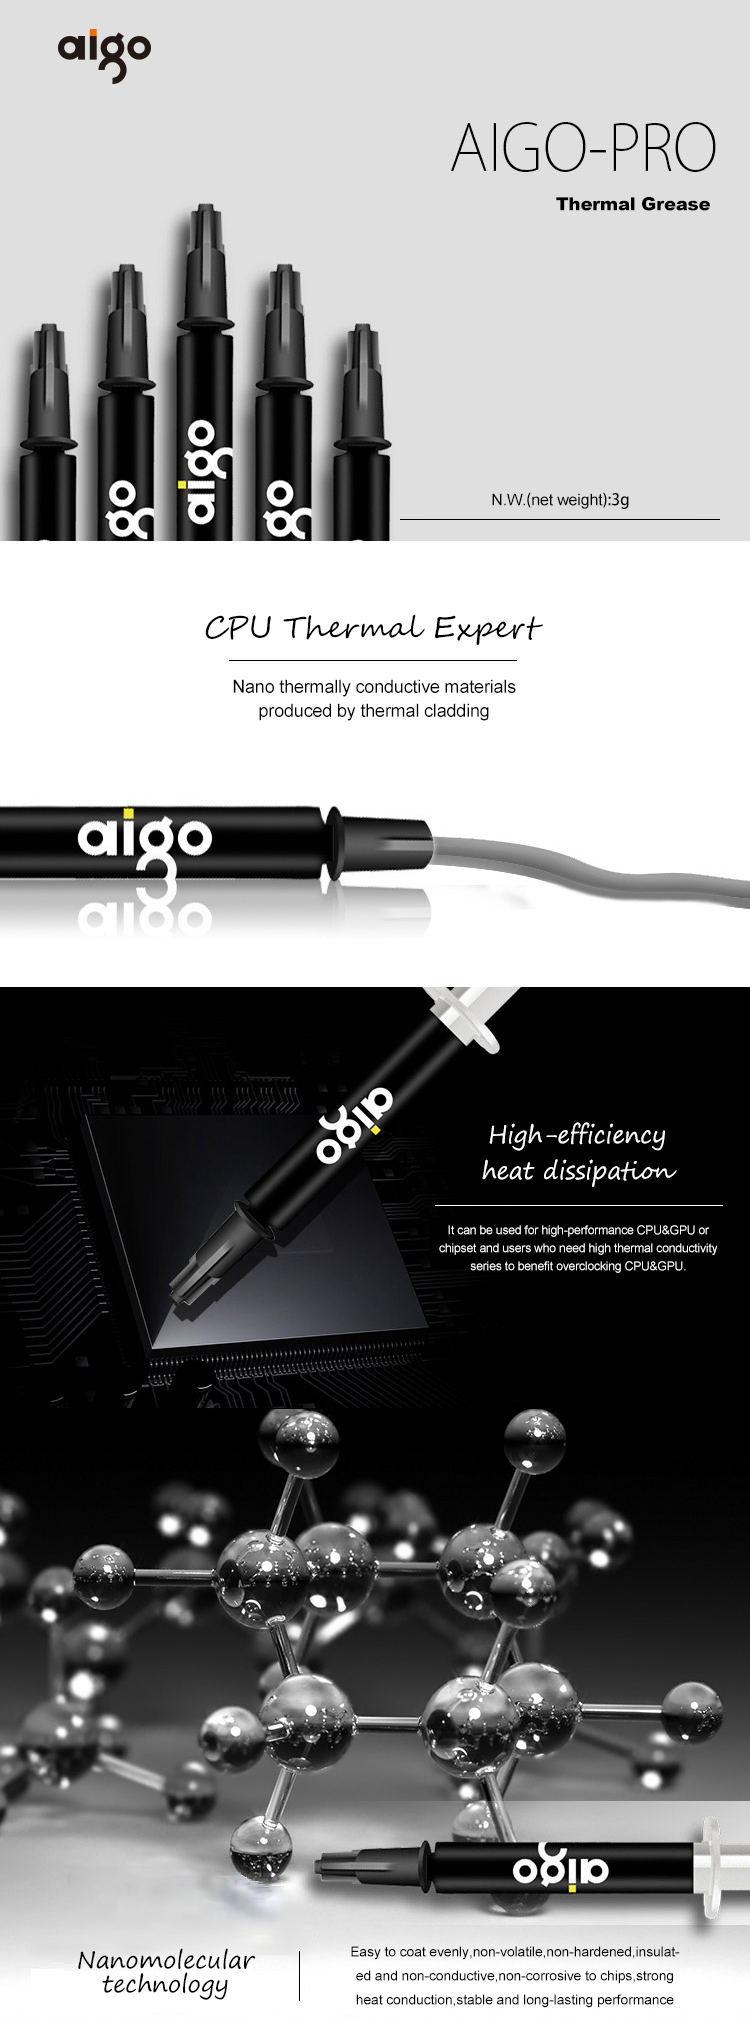 aigo pro CPU Thermal Grease Thermal Paste Silicone thermal silica gel